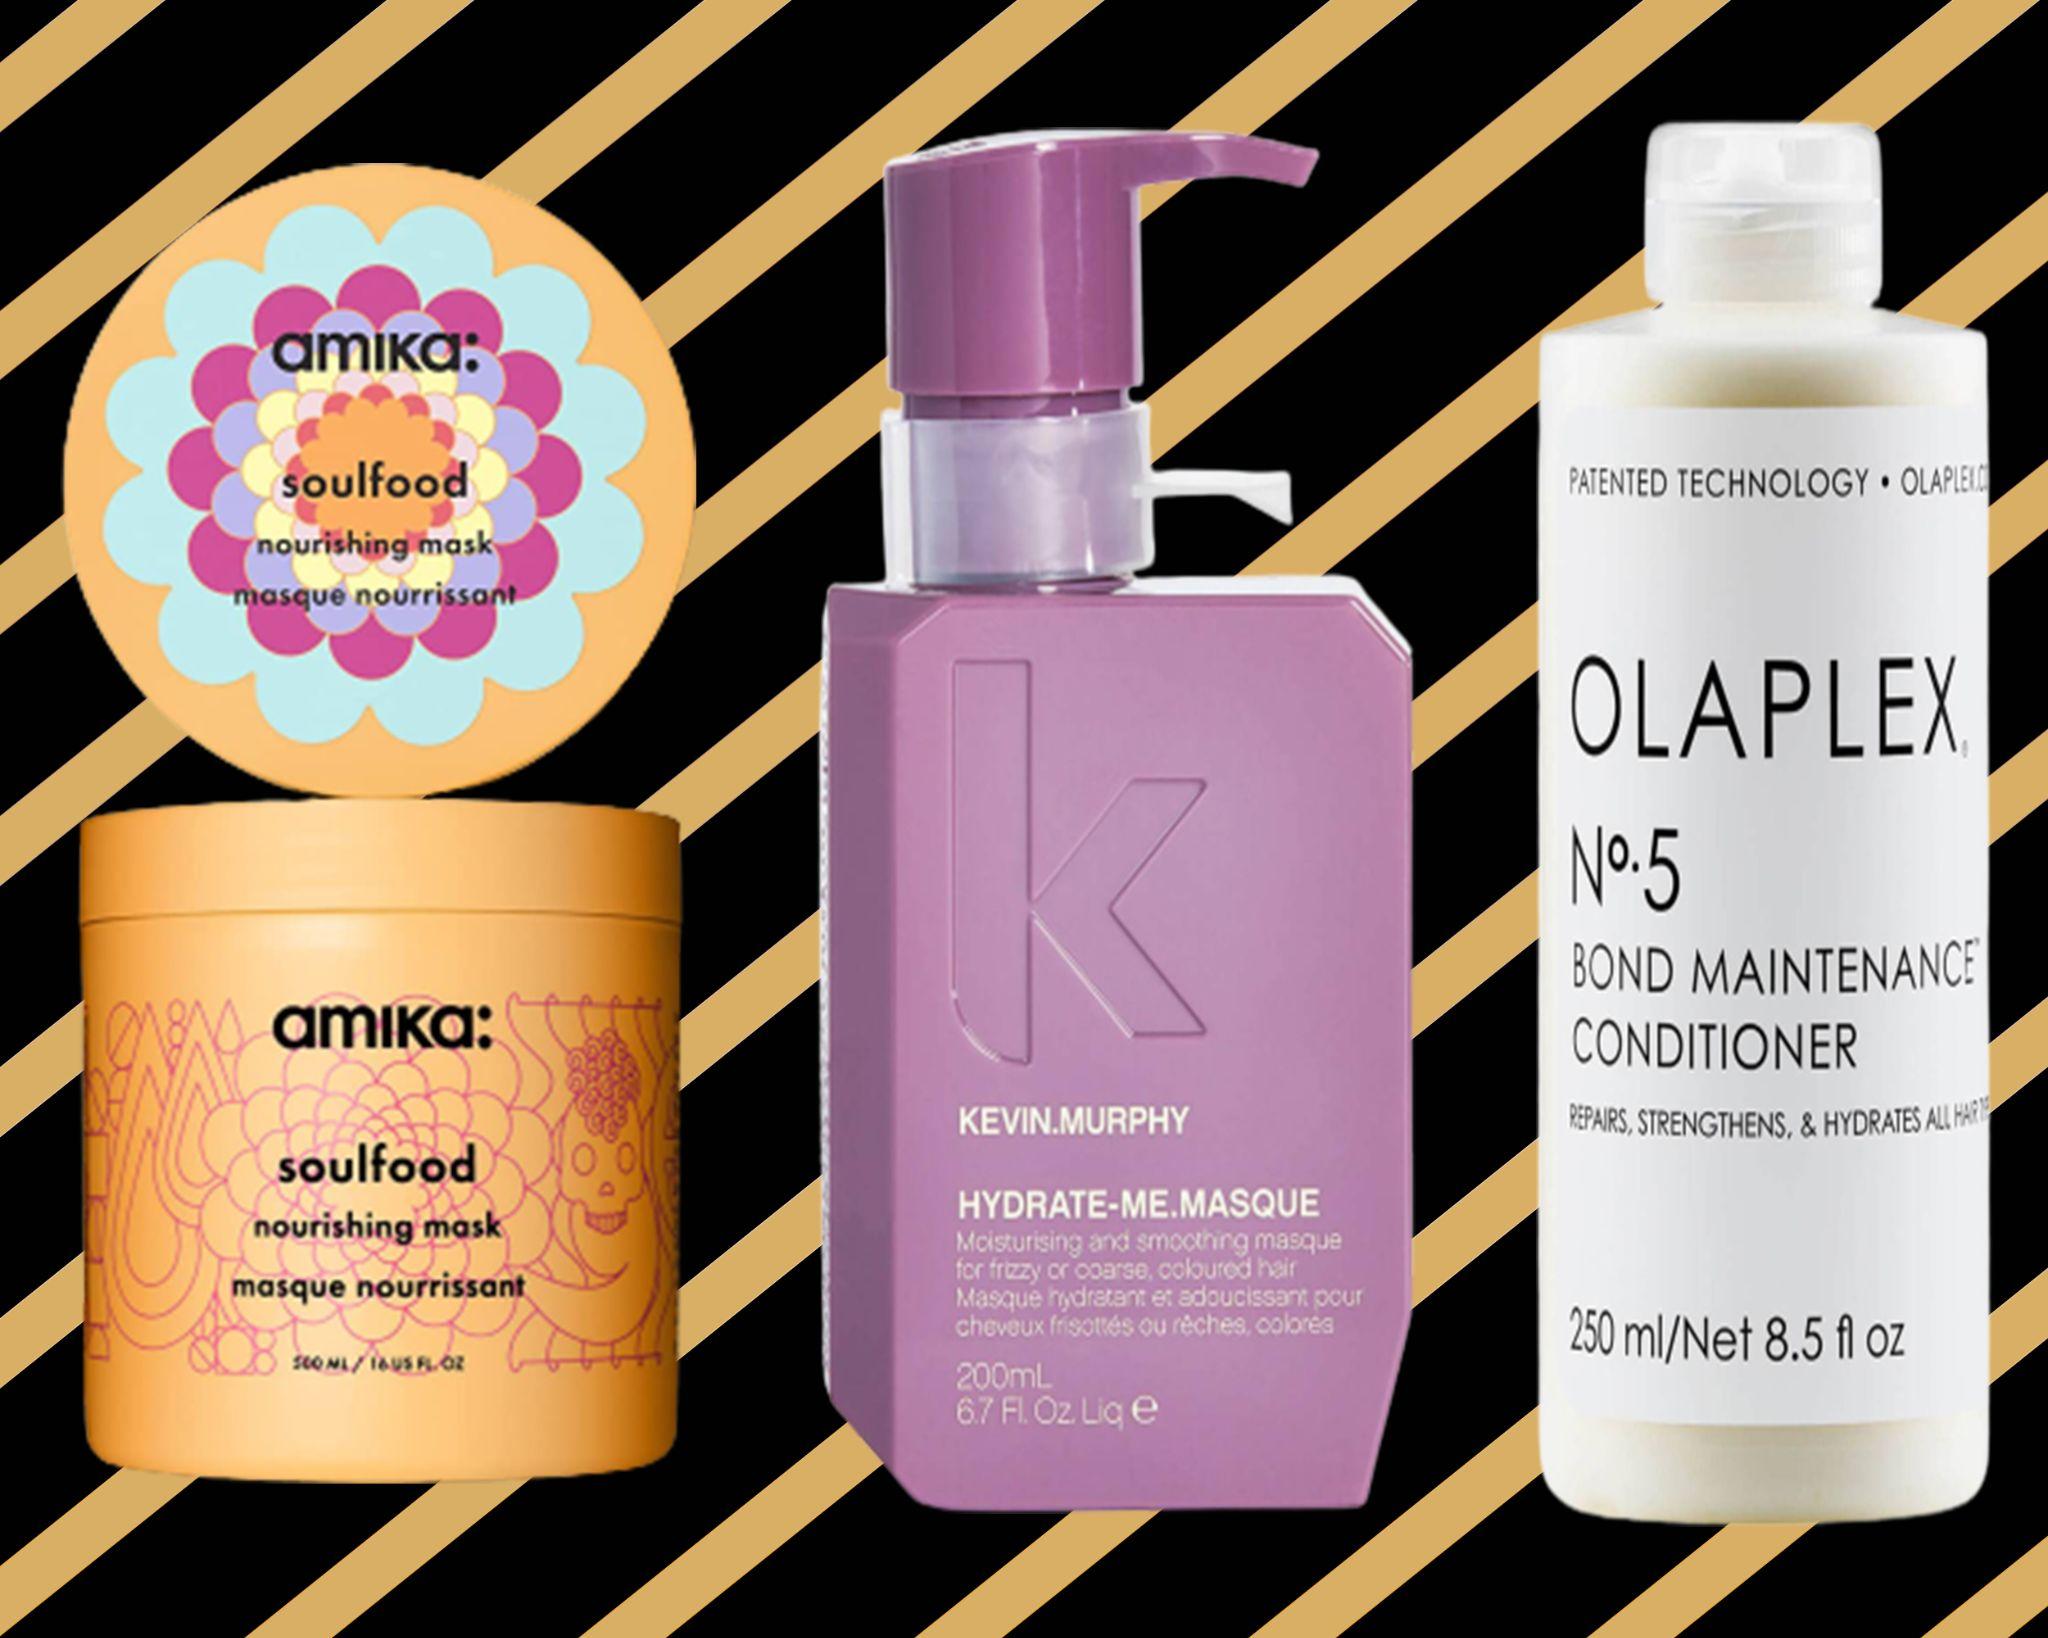 BASED ON HAIR TYPE, HERE ARE THE BEST HAIR MASKS